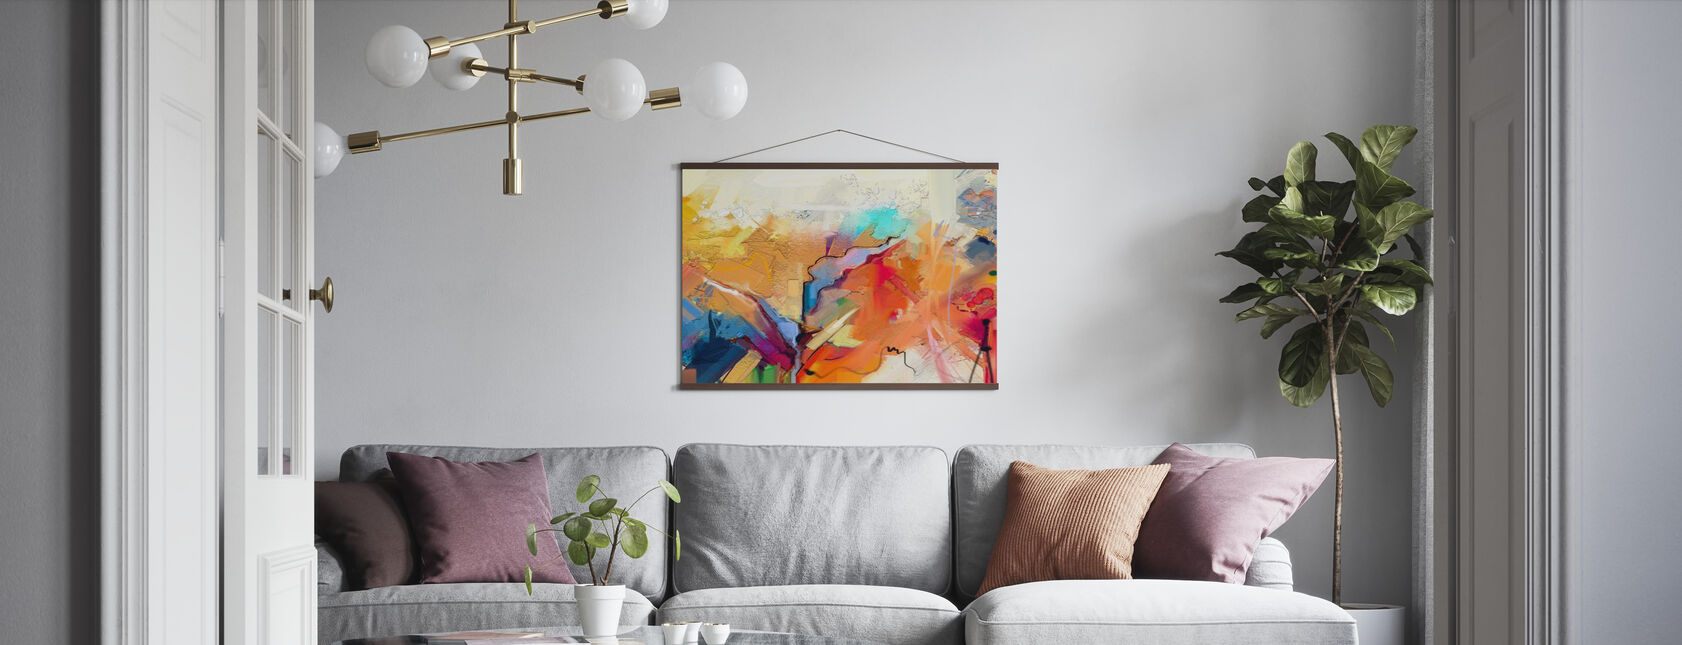 Colorful Abstract Painting - Poster - Living Room